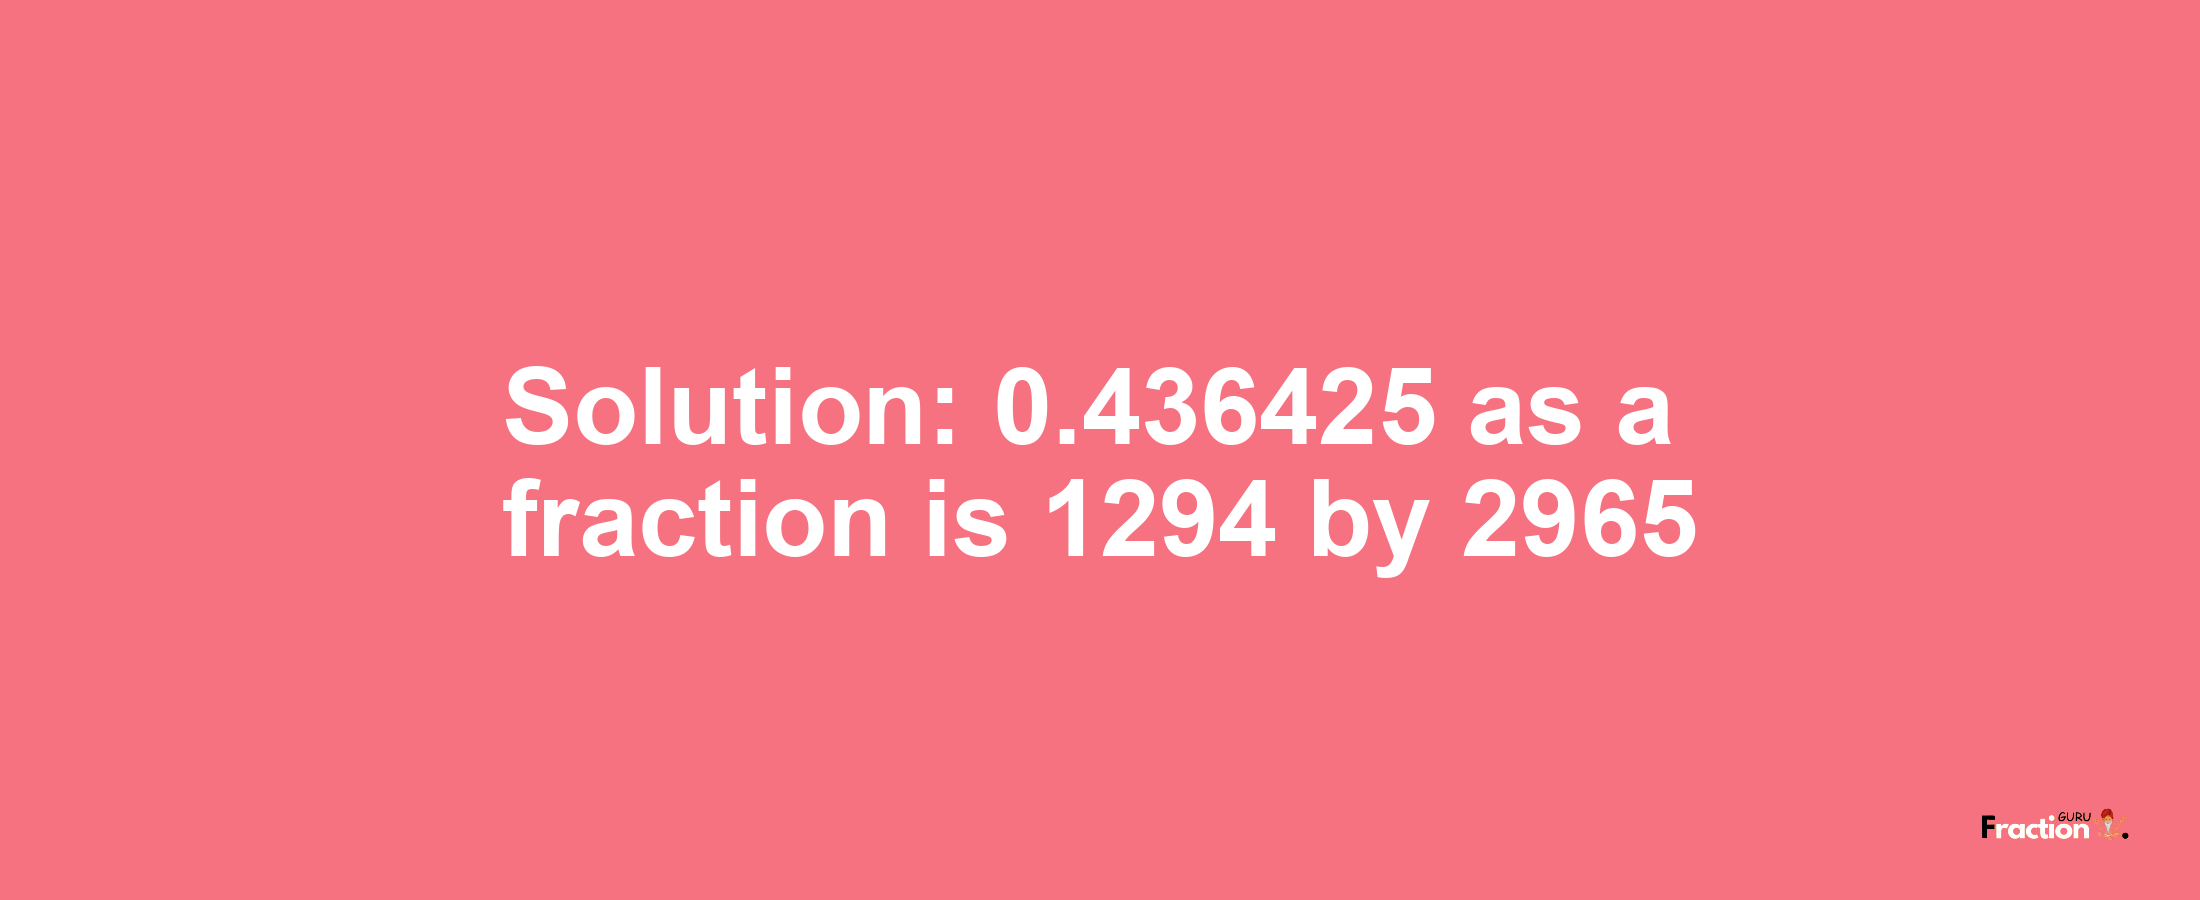 Solution:0.436425 as a fraction is 1294/2965